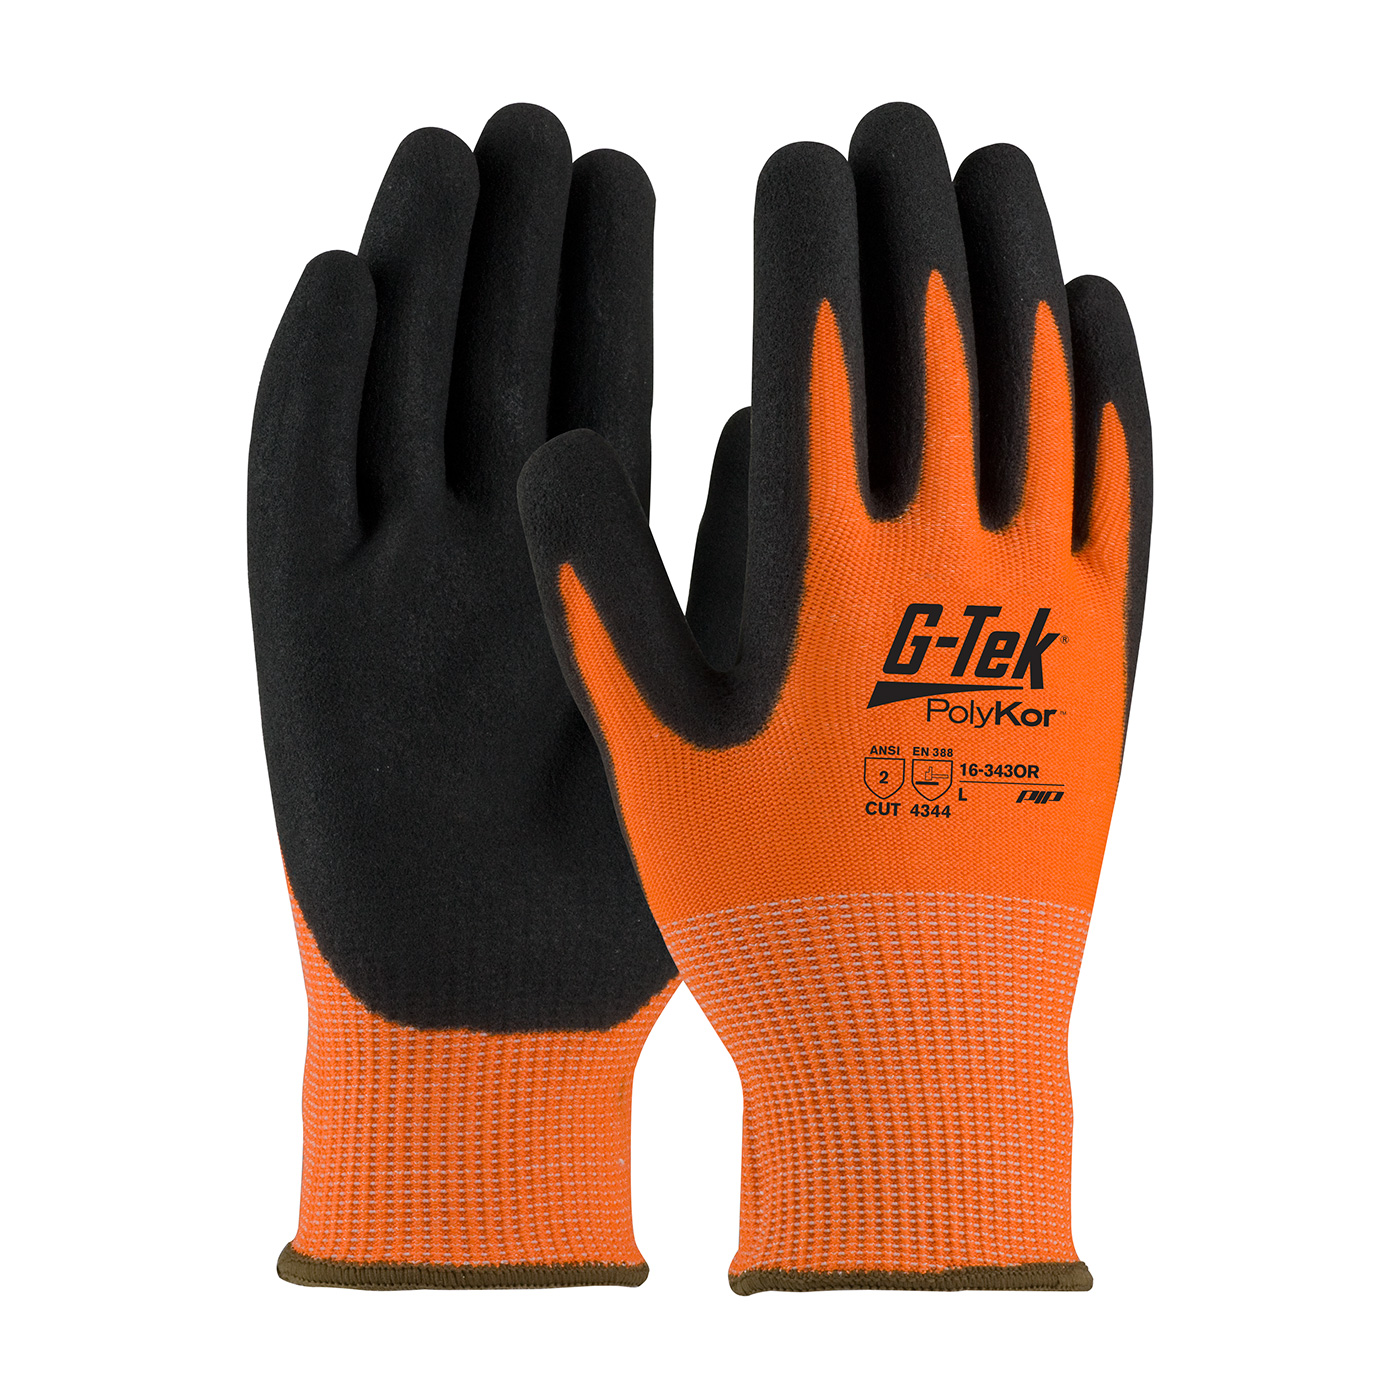 PIP 16-343OR/L G-Tek PolyKor Hi-Vis Seamless Knit PolyKor Blended Glove with Double-Dipped Nitrile Coated MicroSurface Grip on Palm & Fingers - Large PID-16 343OR L